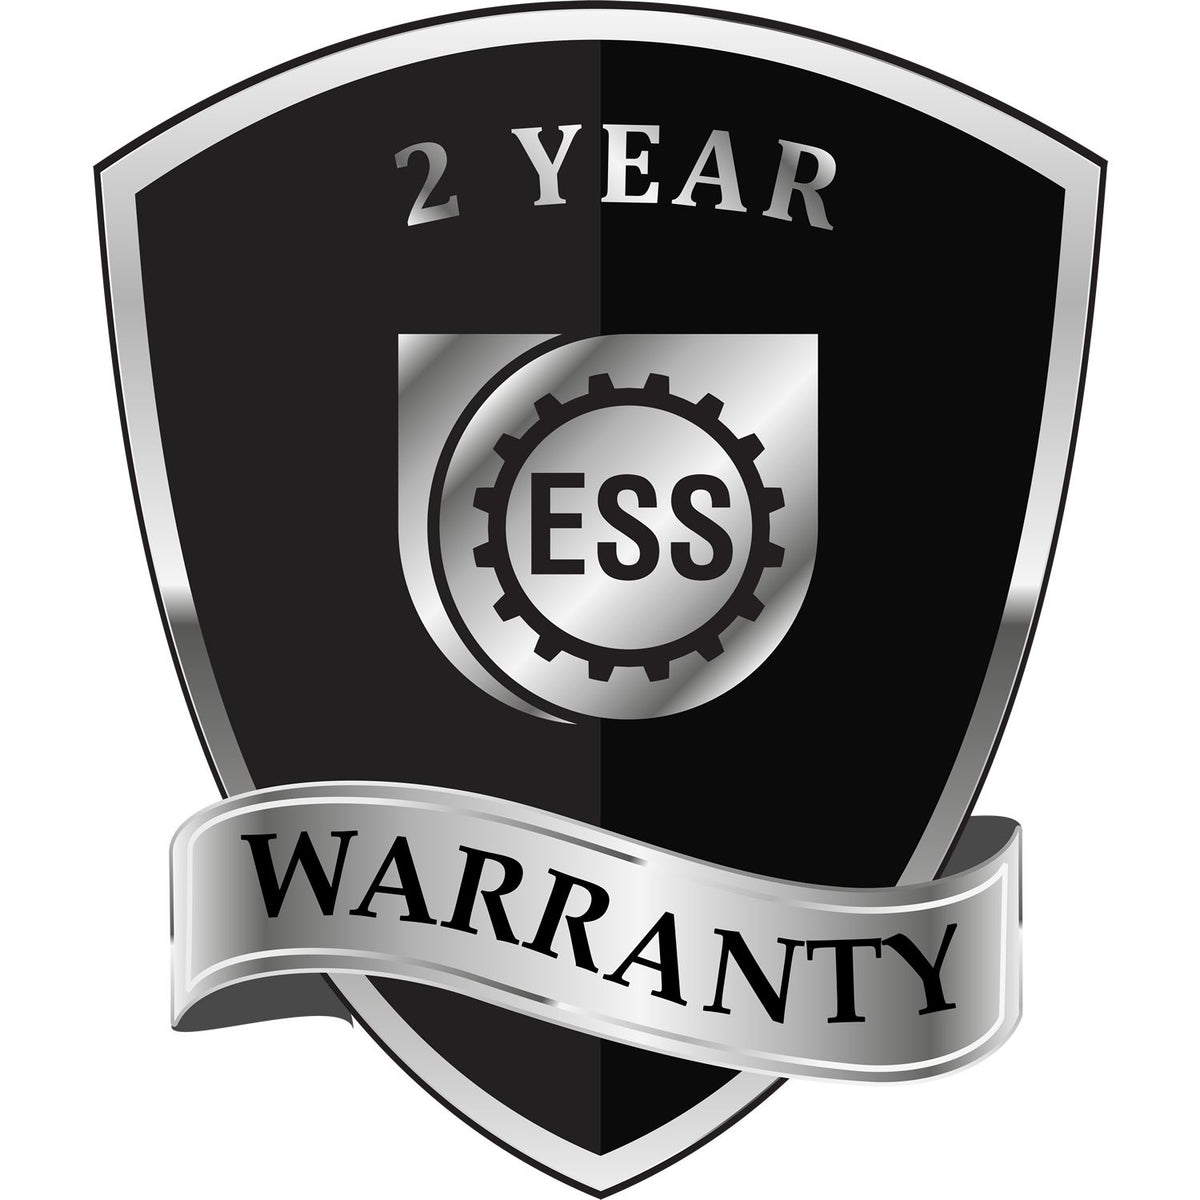 A black and silver badge or emblem showing warranty information for the Heavy Duty Cast Iron Missouri Geologist Seal Embosser